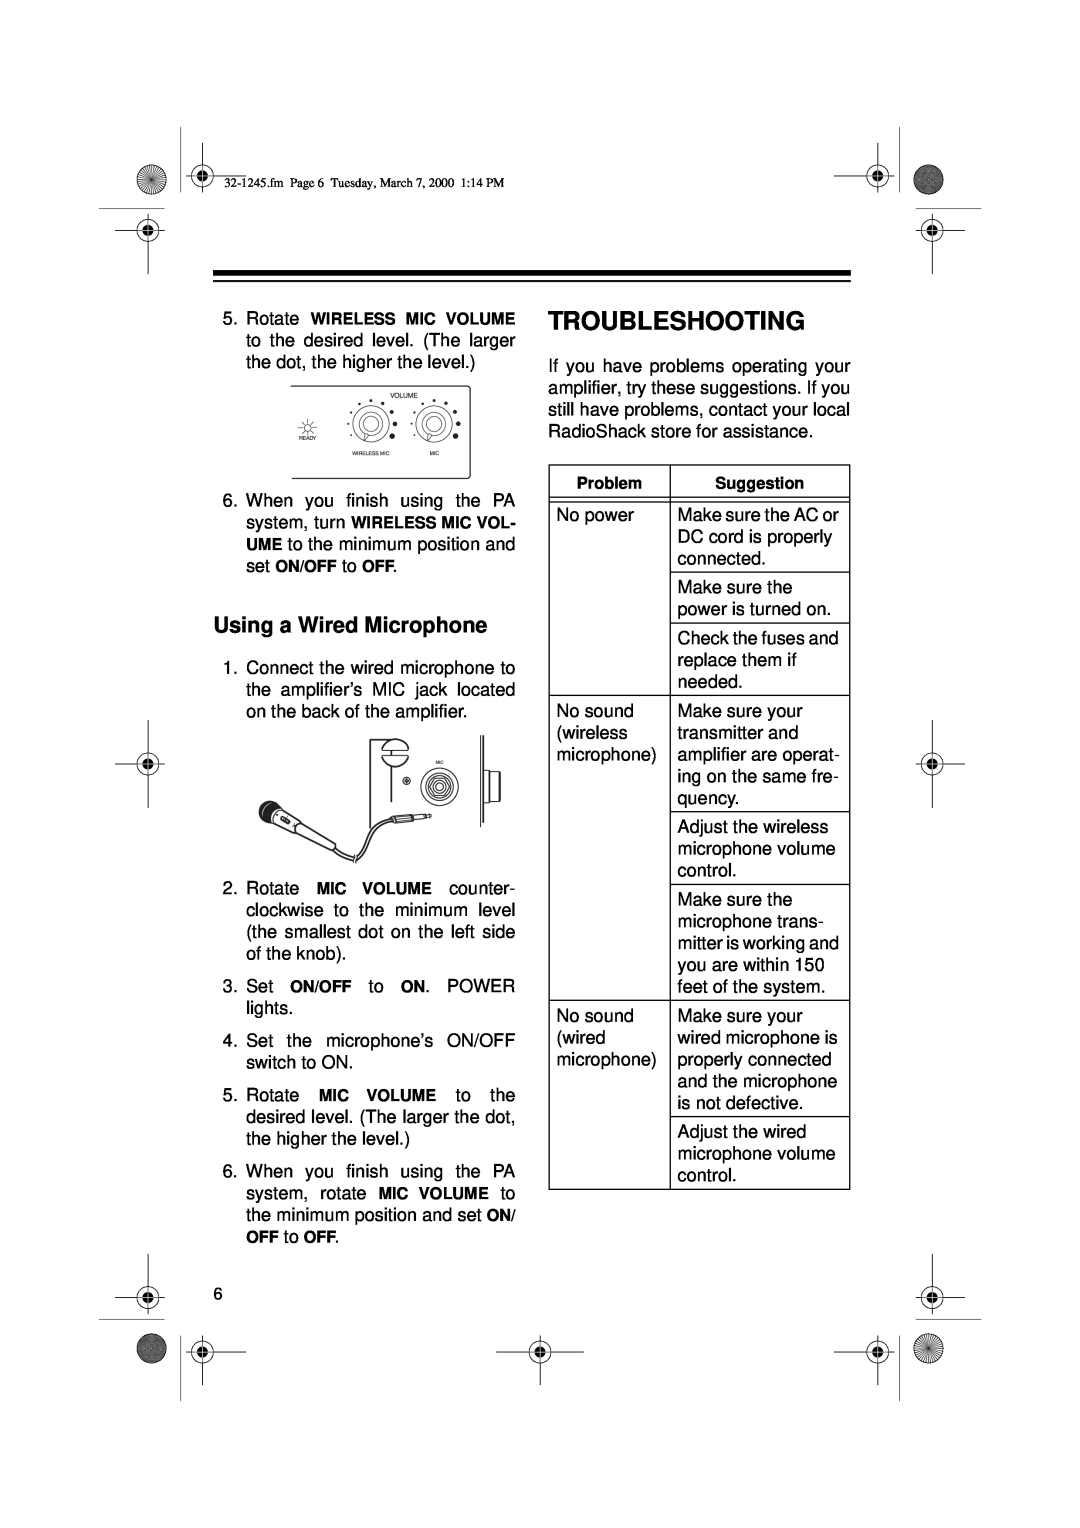 Ricoh 32-1245 owner manual Troubleshooting, Using a Wired Microphone 